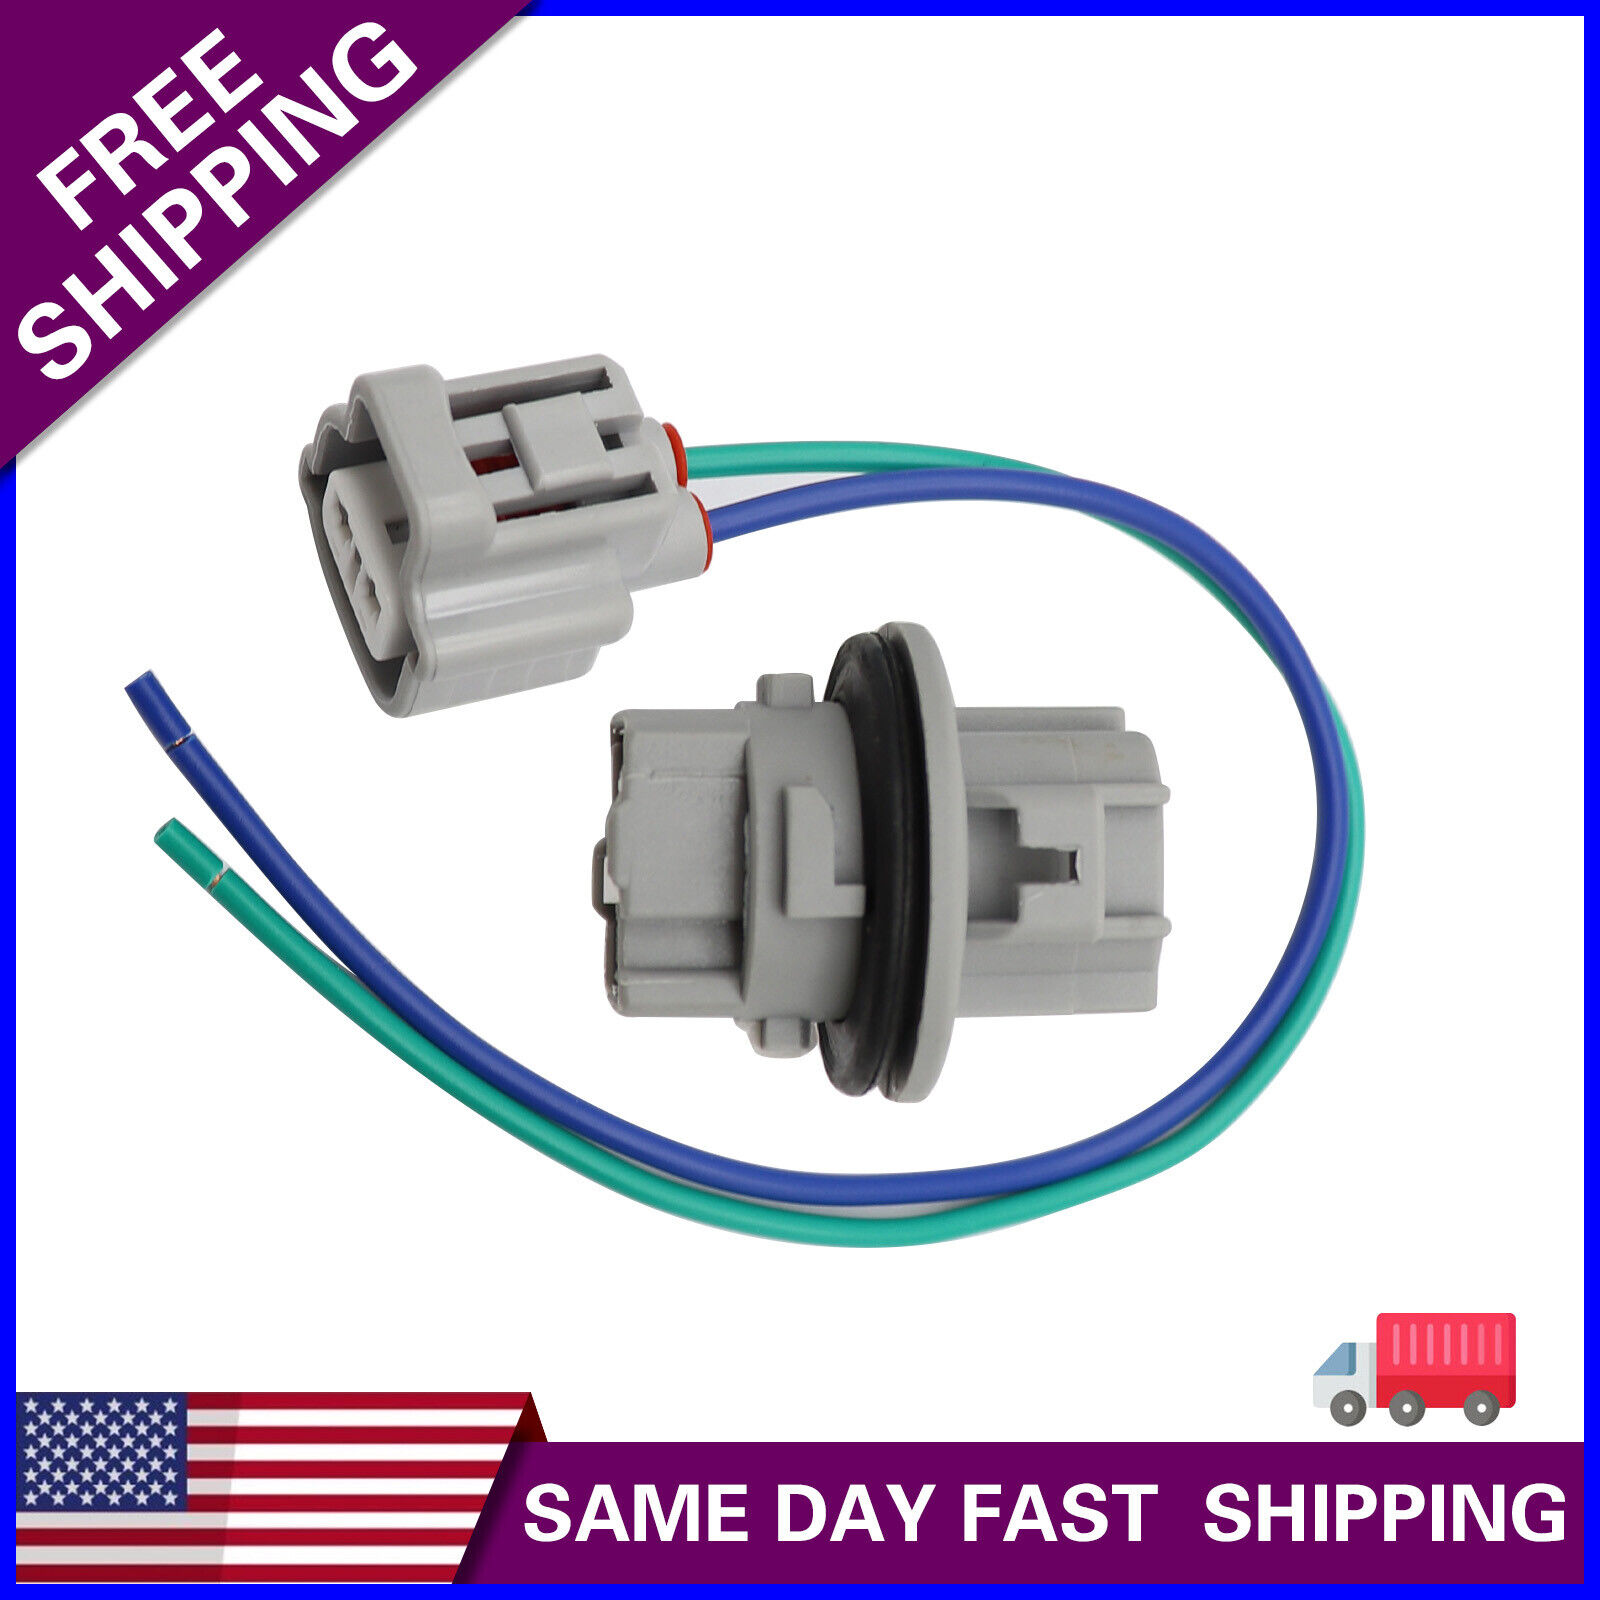 90075-60028 Turn Signal Socket Connector for Toyota Tacoma iQ 4Runner Camry